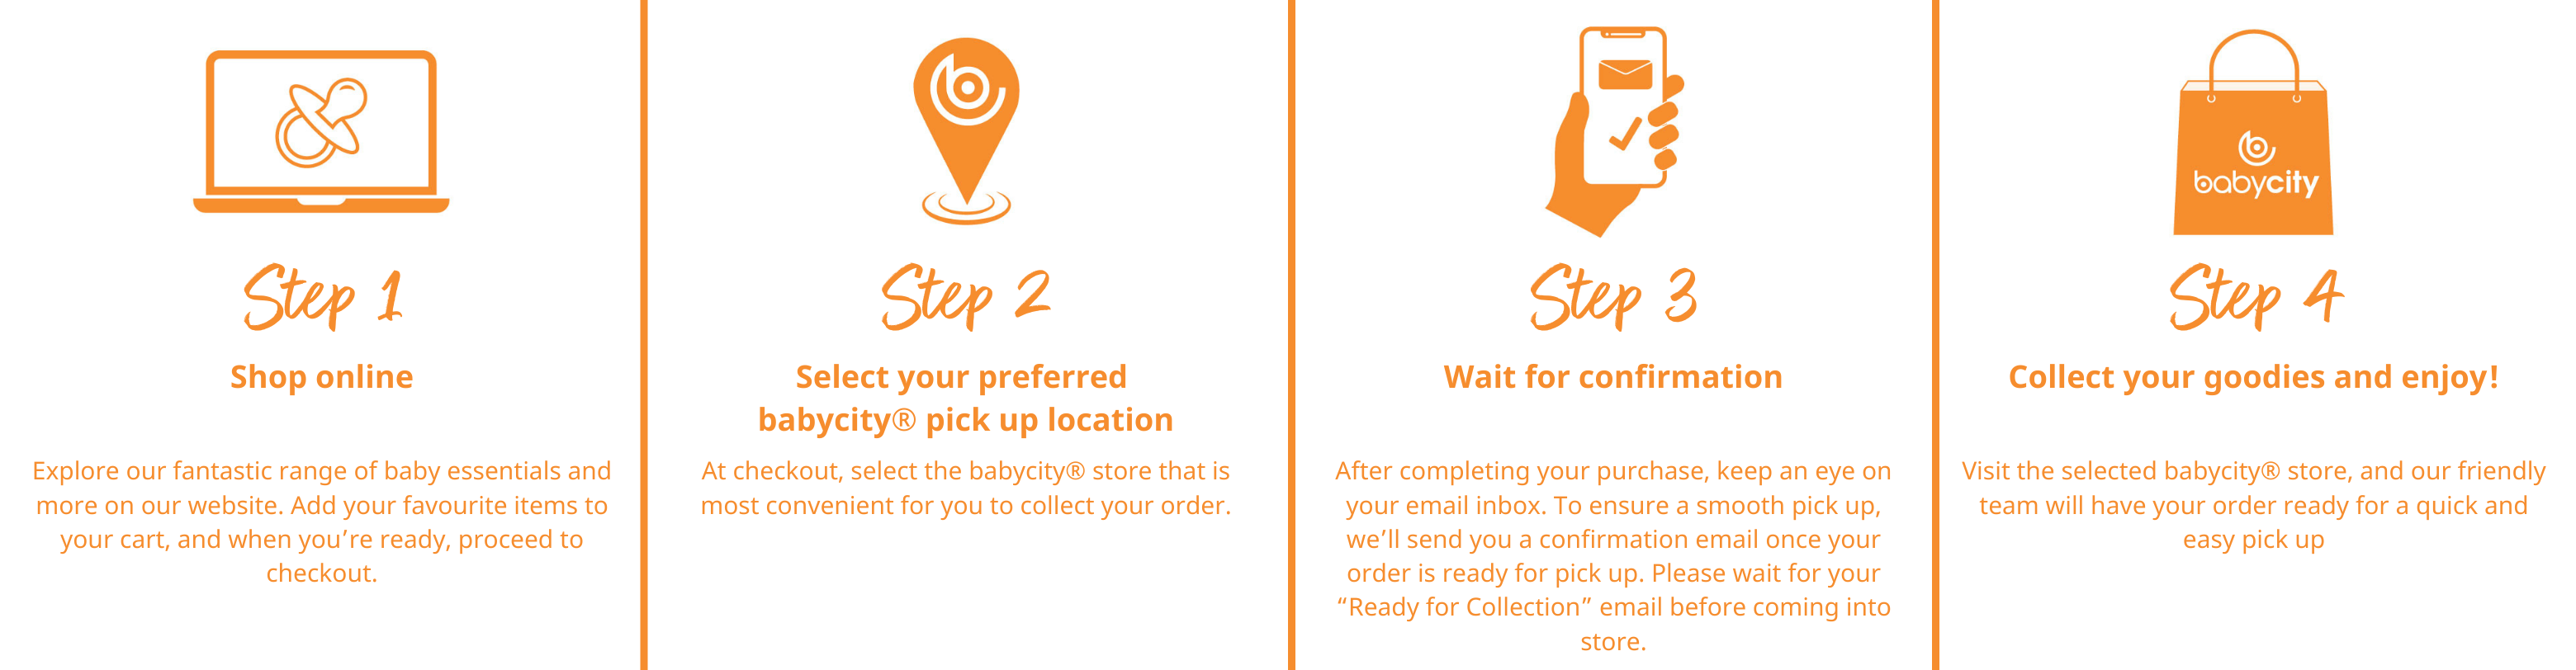 Click & Collect process instructions